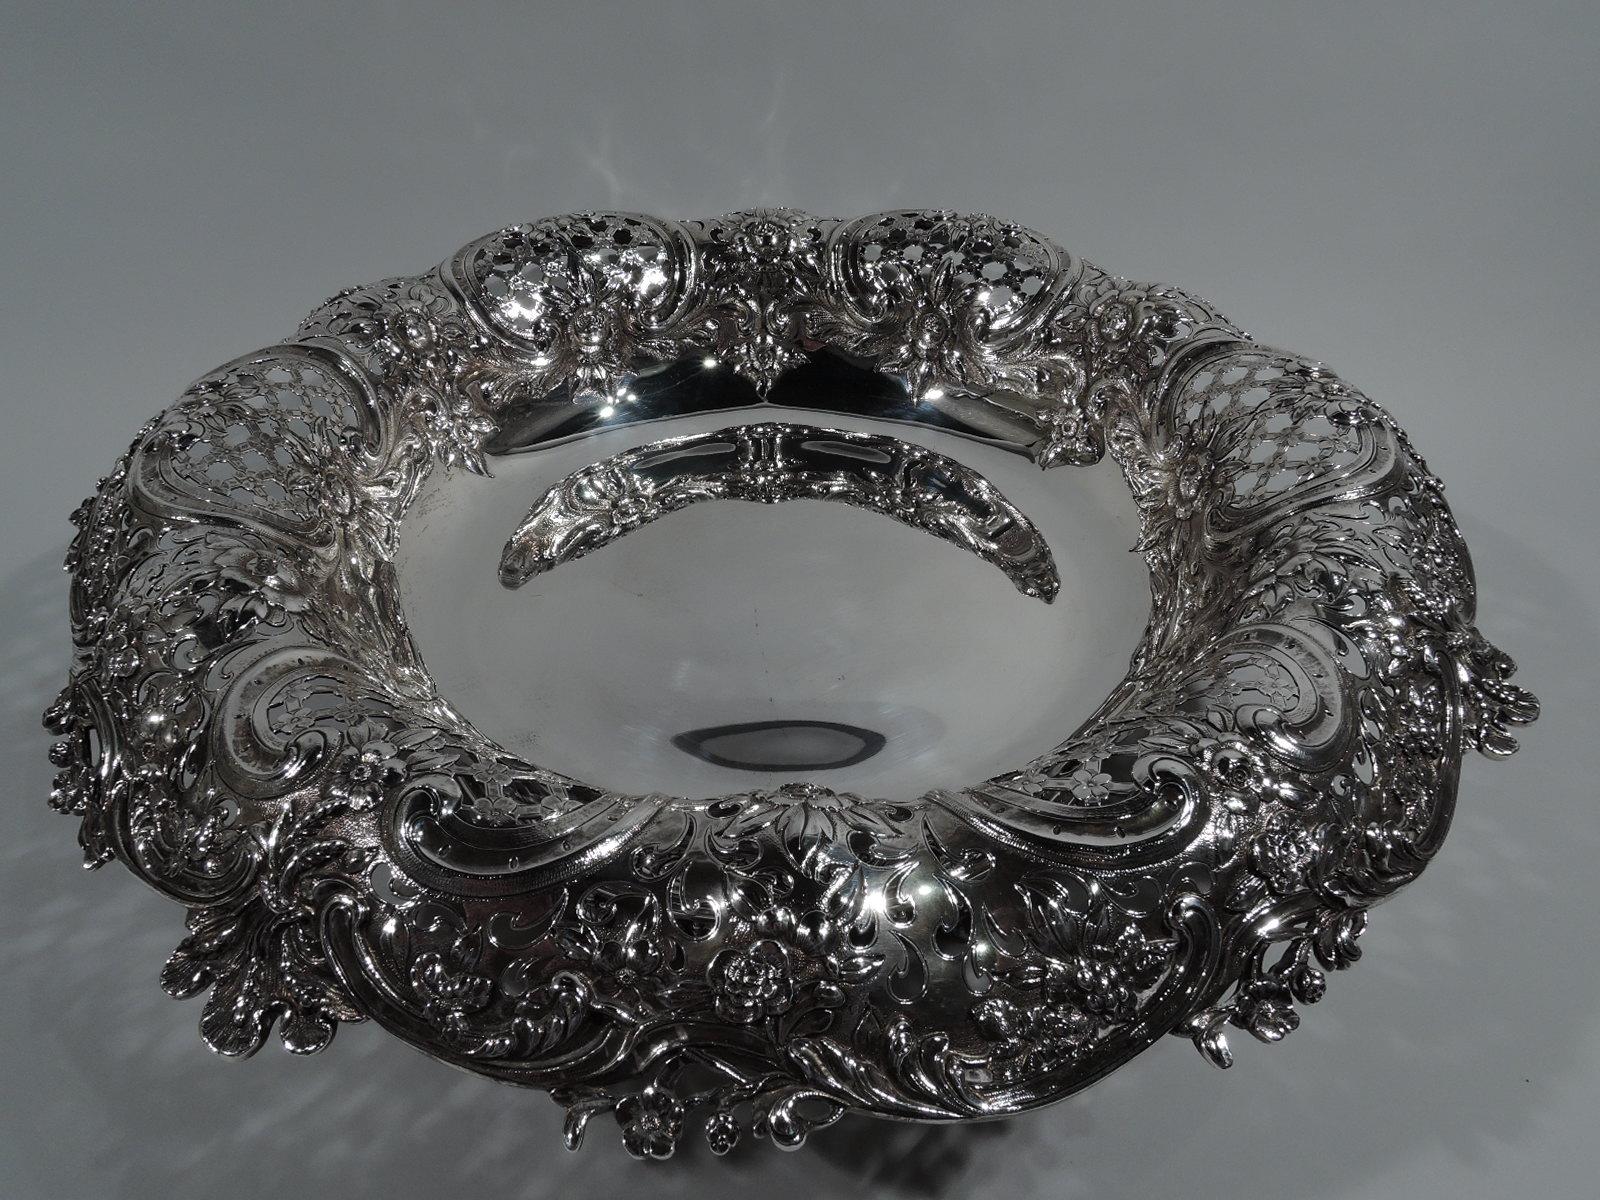 Wonderfully sumptuous sterling silver centerpiece bowl. Made by Tiffany & Co. in New York. Plain well with pierced and chased turned-down rim with flowers and trellis. Irregularly scrolled rim interspersed with leaves and flowers. Foot ring has 6